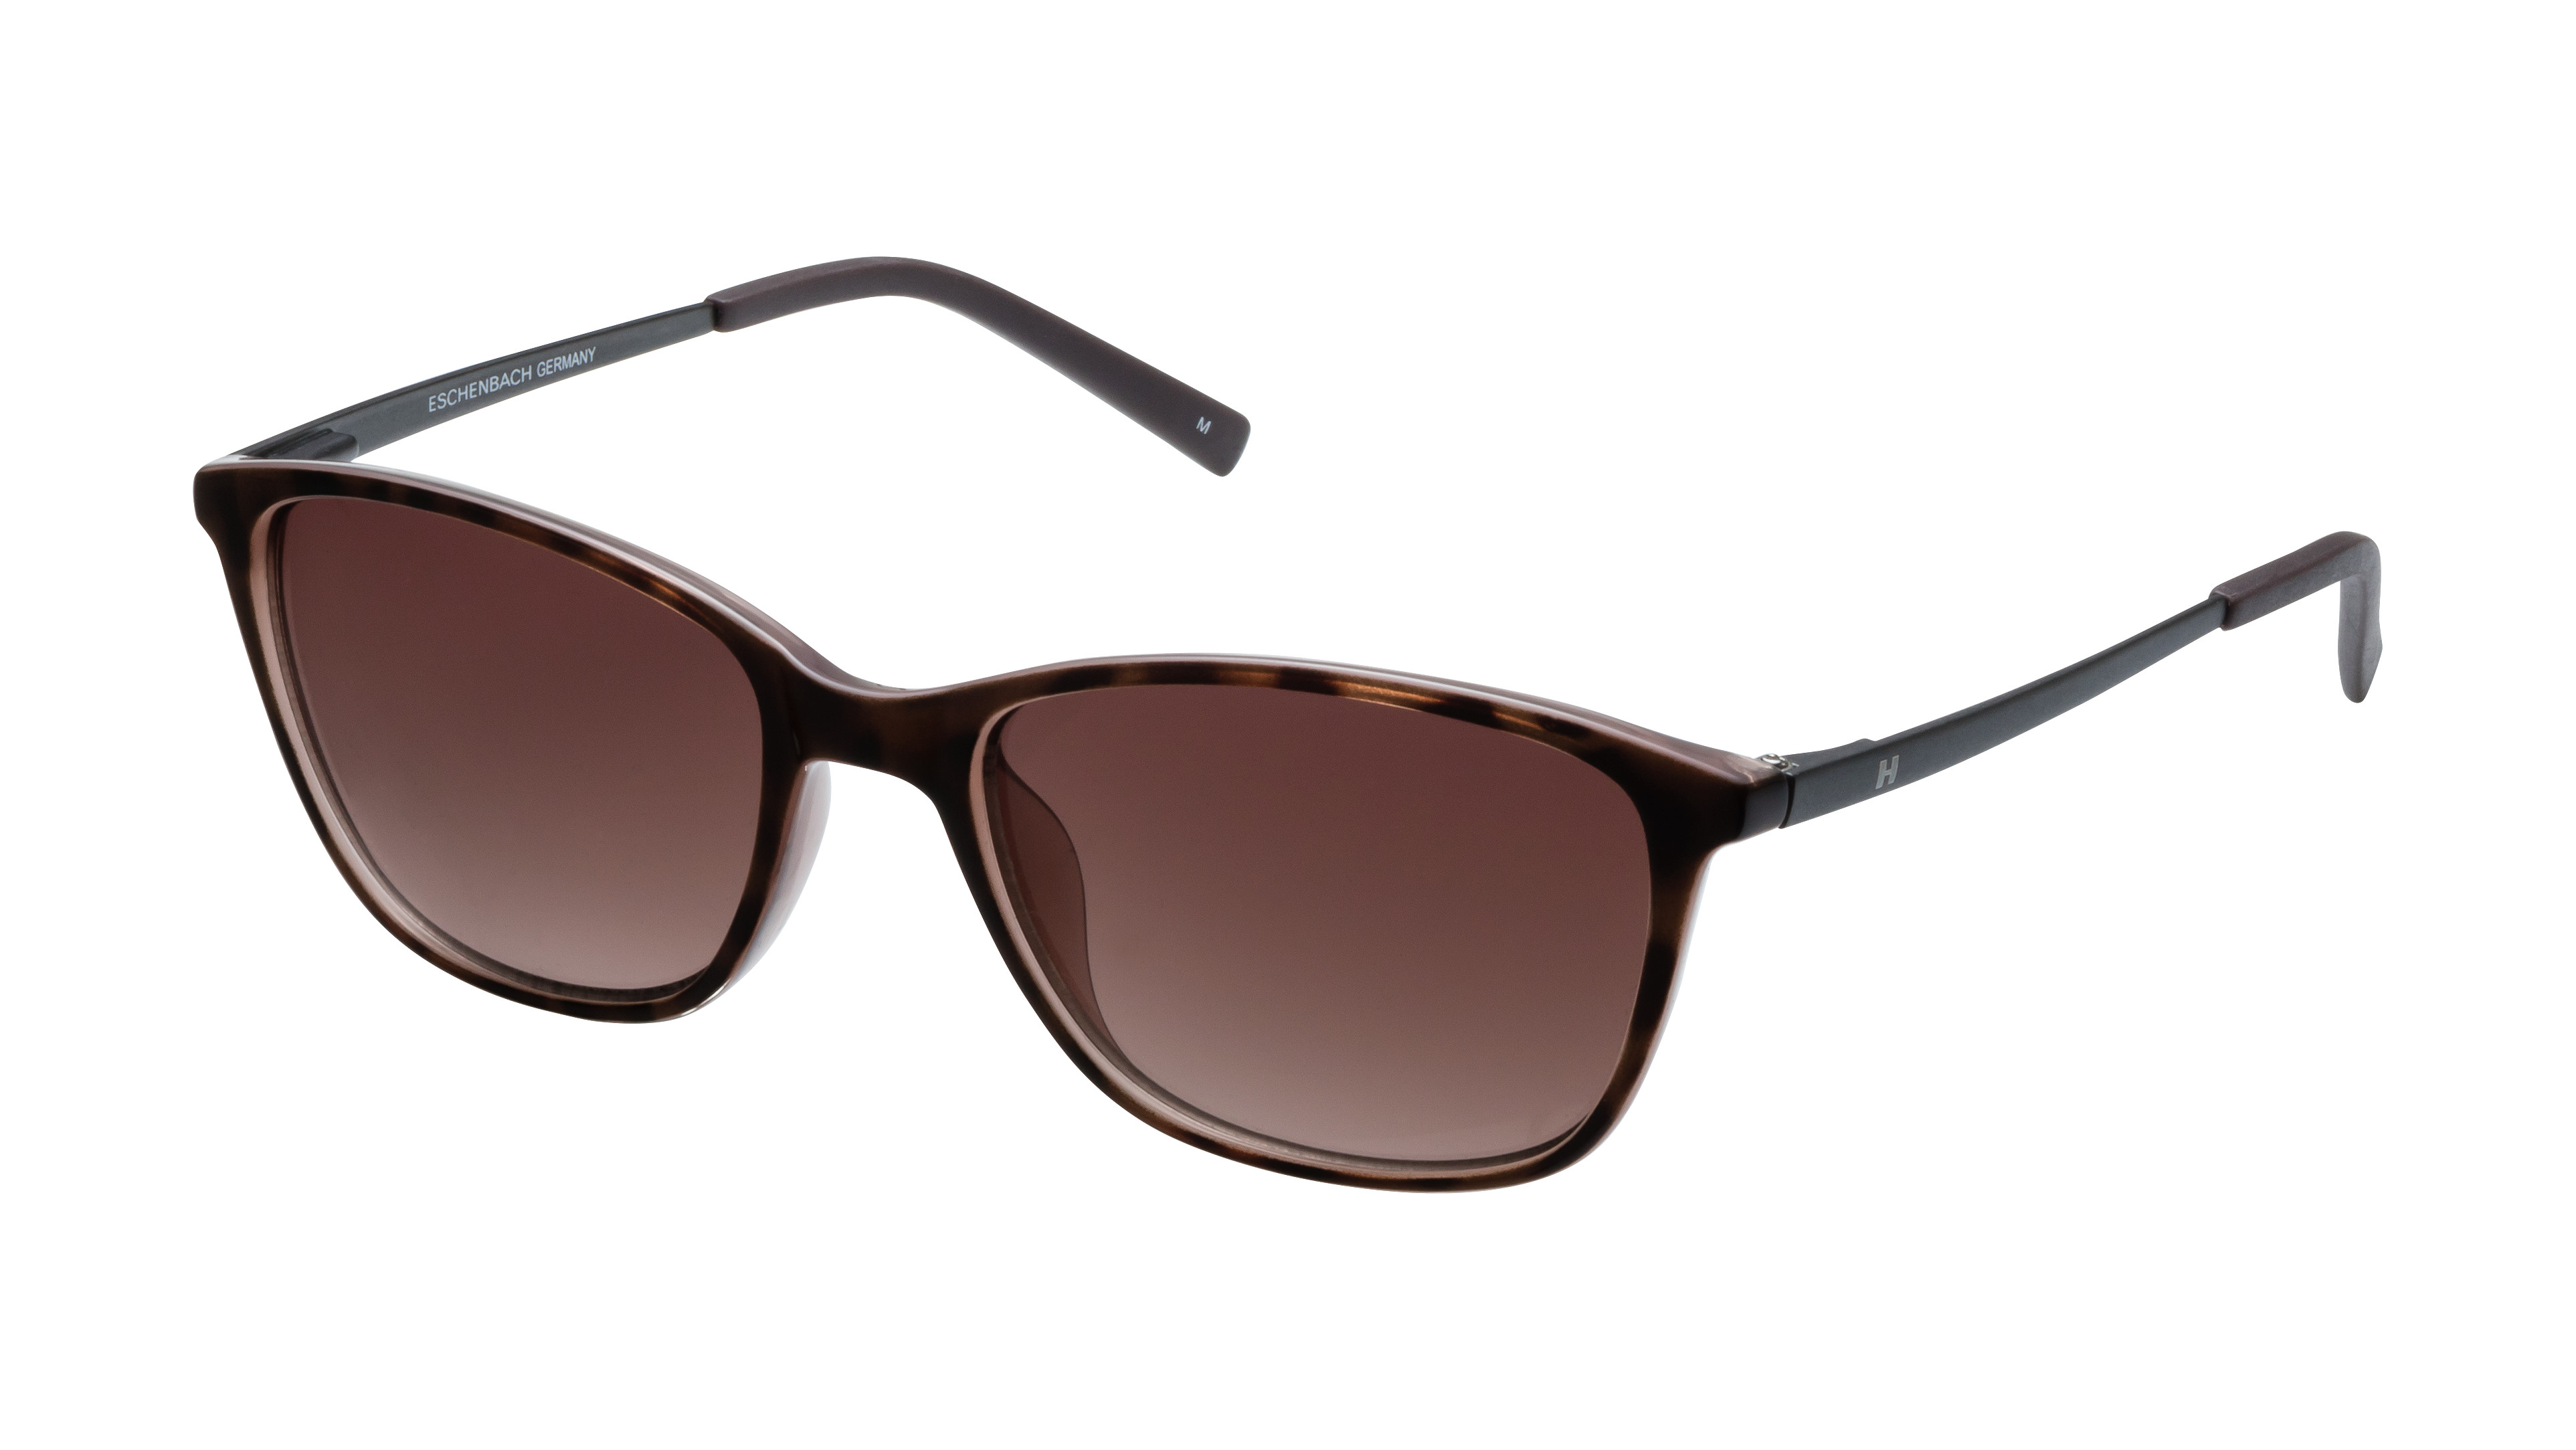 [products.image.angle_left01] HUMPHREY´S eyewear 584034 65 Sonnenbrille